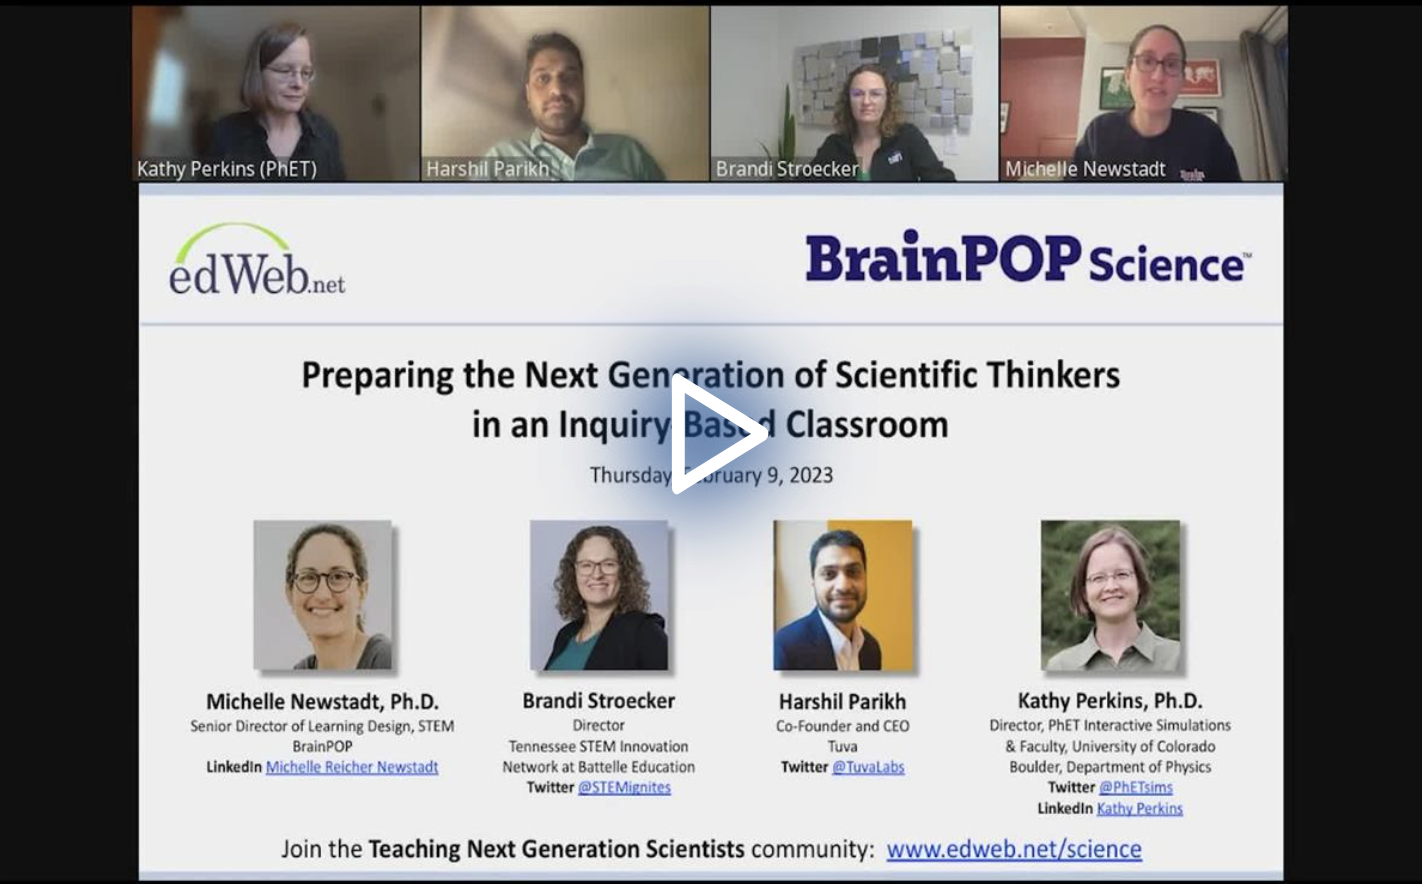 Preparing the Next Generation of Scientific Thinkers in an Inquiry-Based Classroom edLeader Panel recording screenshot